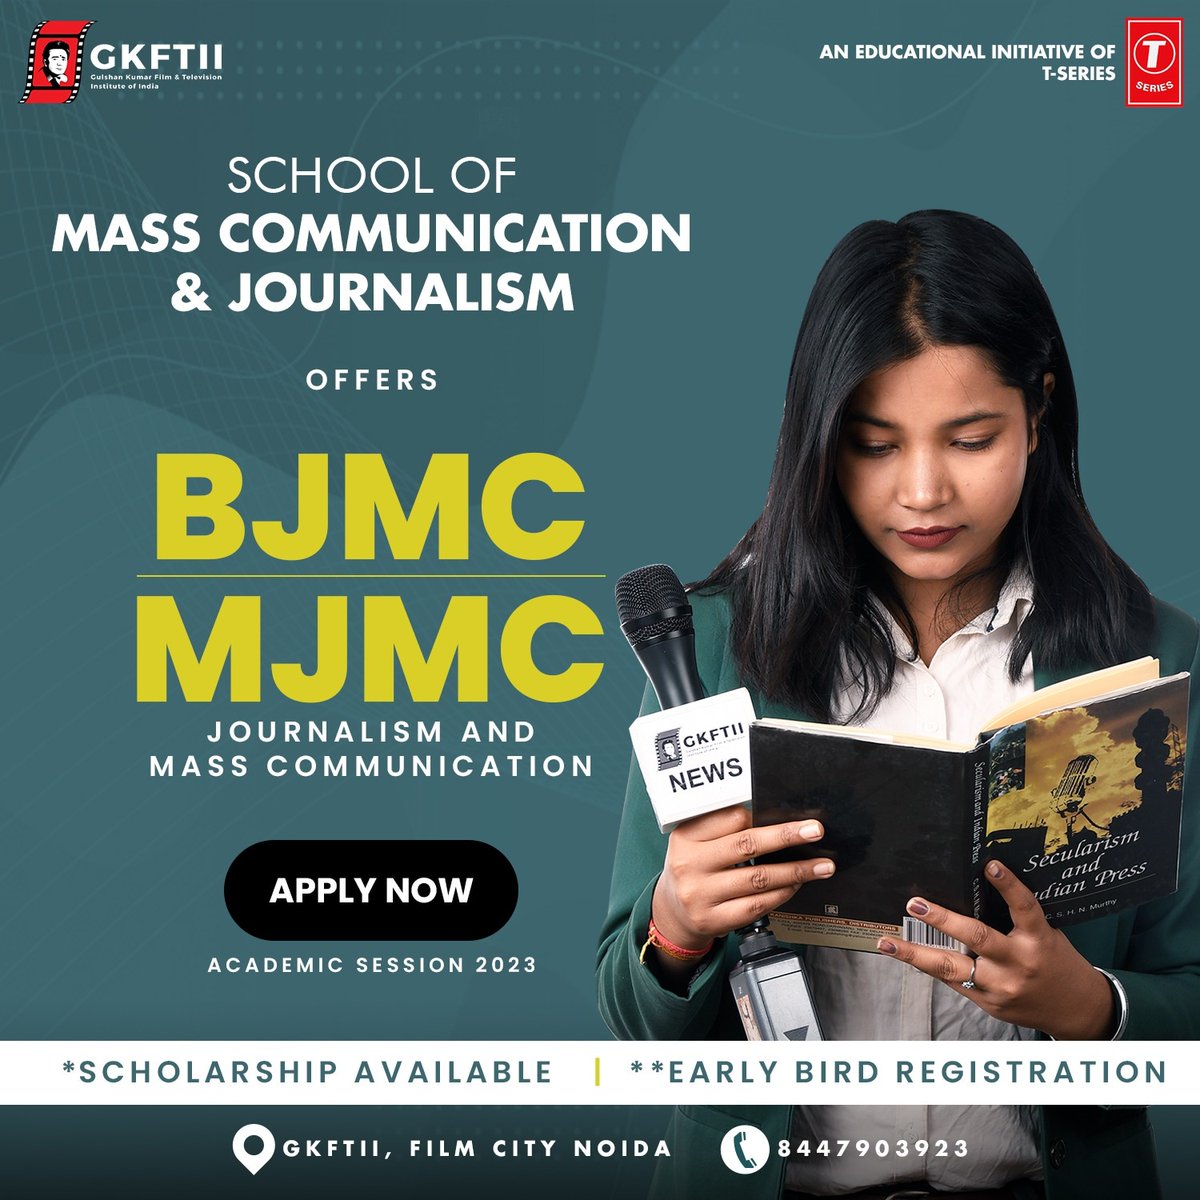 ⚠️ Admission Alert !

Registrations For Academic Year 2023 Closing Soon .

✔️BJMC & MJMC

Get your Journalism Degree at GKFTII - Media Institute by ' T-Series'

Enroll Today.
.
.
.
#BestCollegeDelhiNCR #Career #MassCommEducation #JournalismEducation #MediaCollege